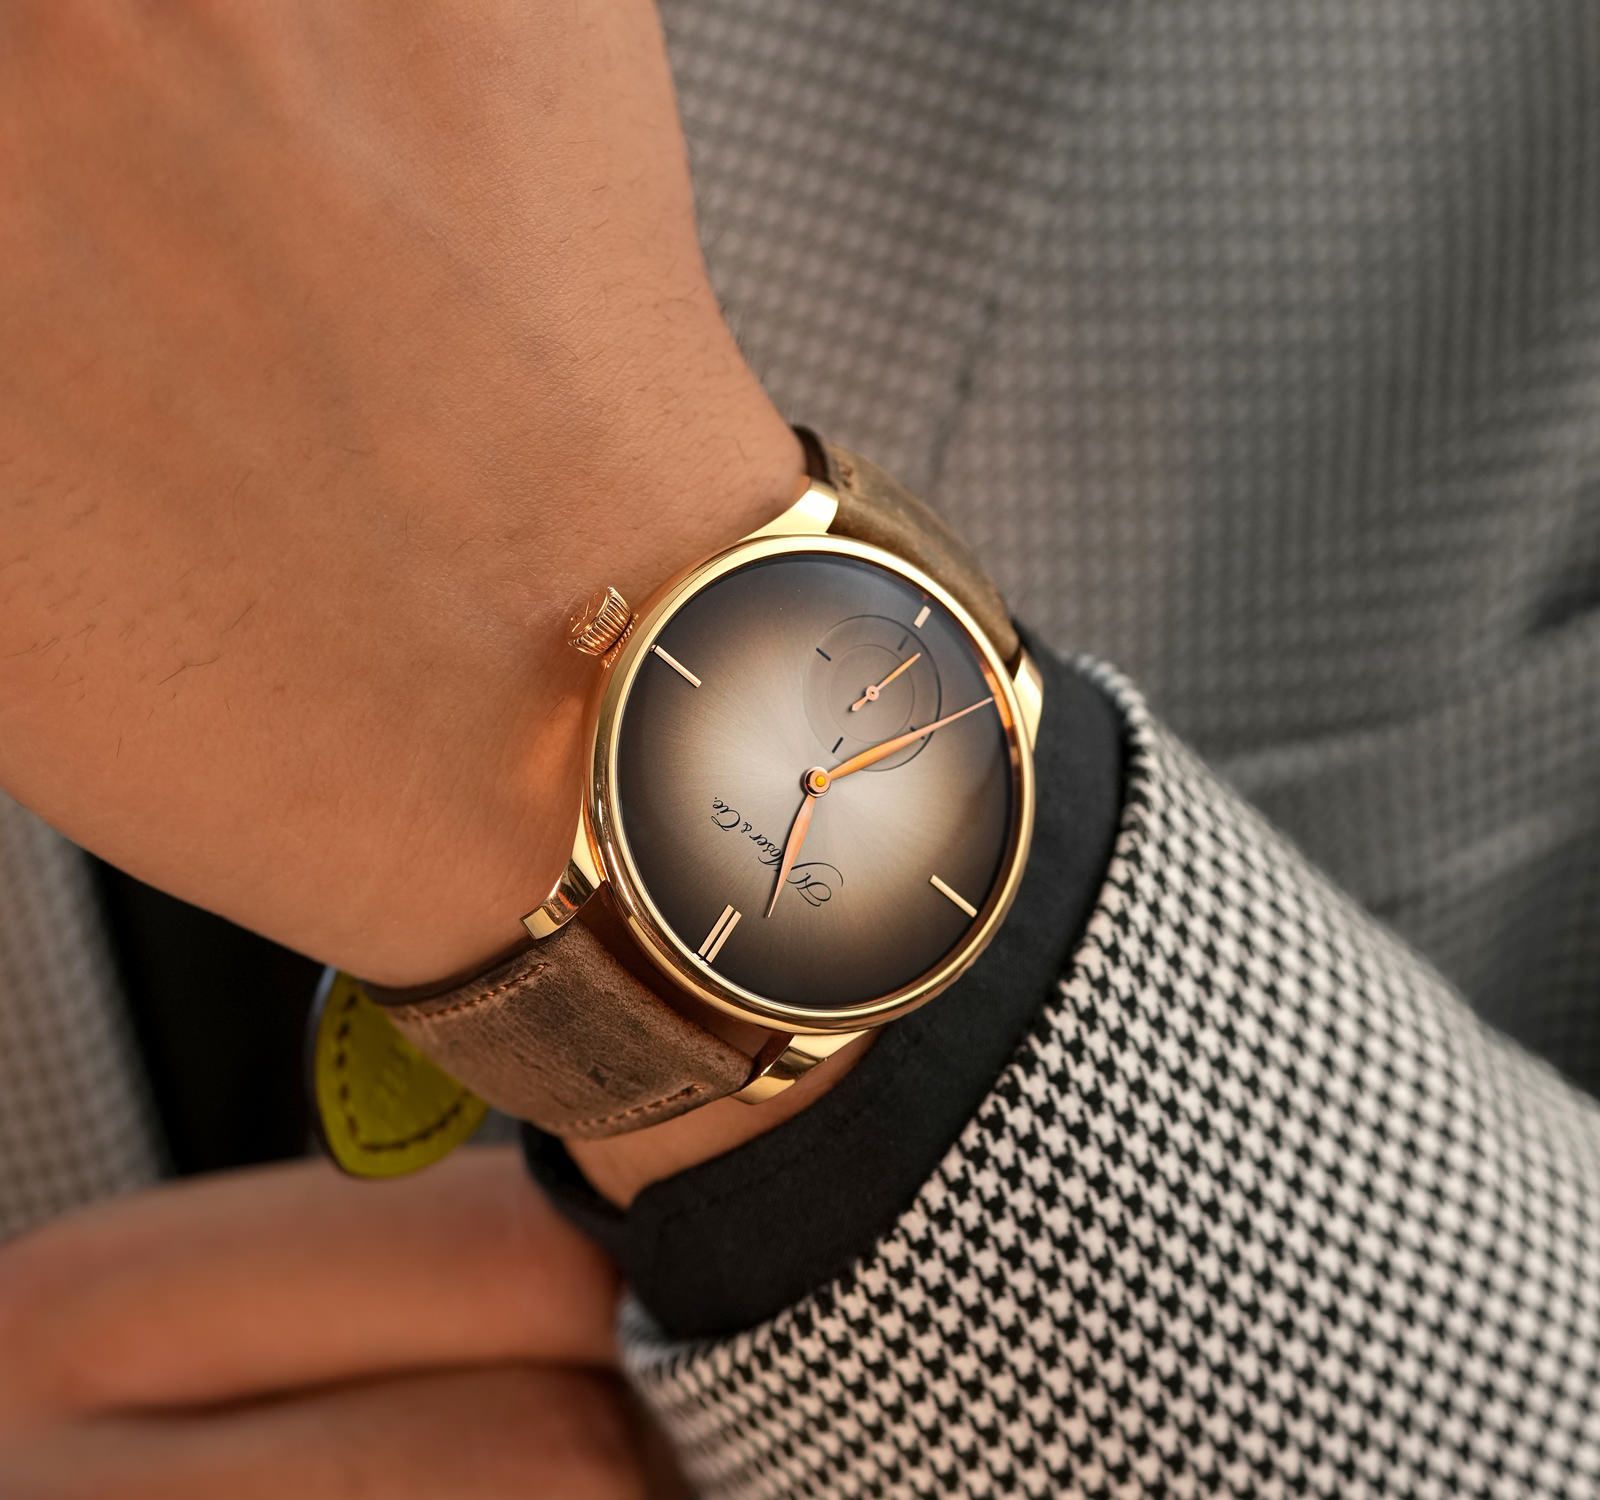 H. Moser & Cie. Watches